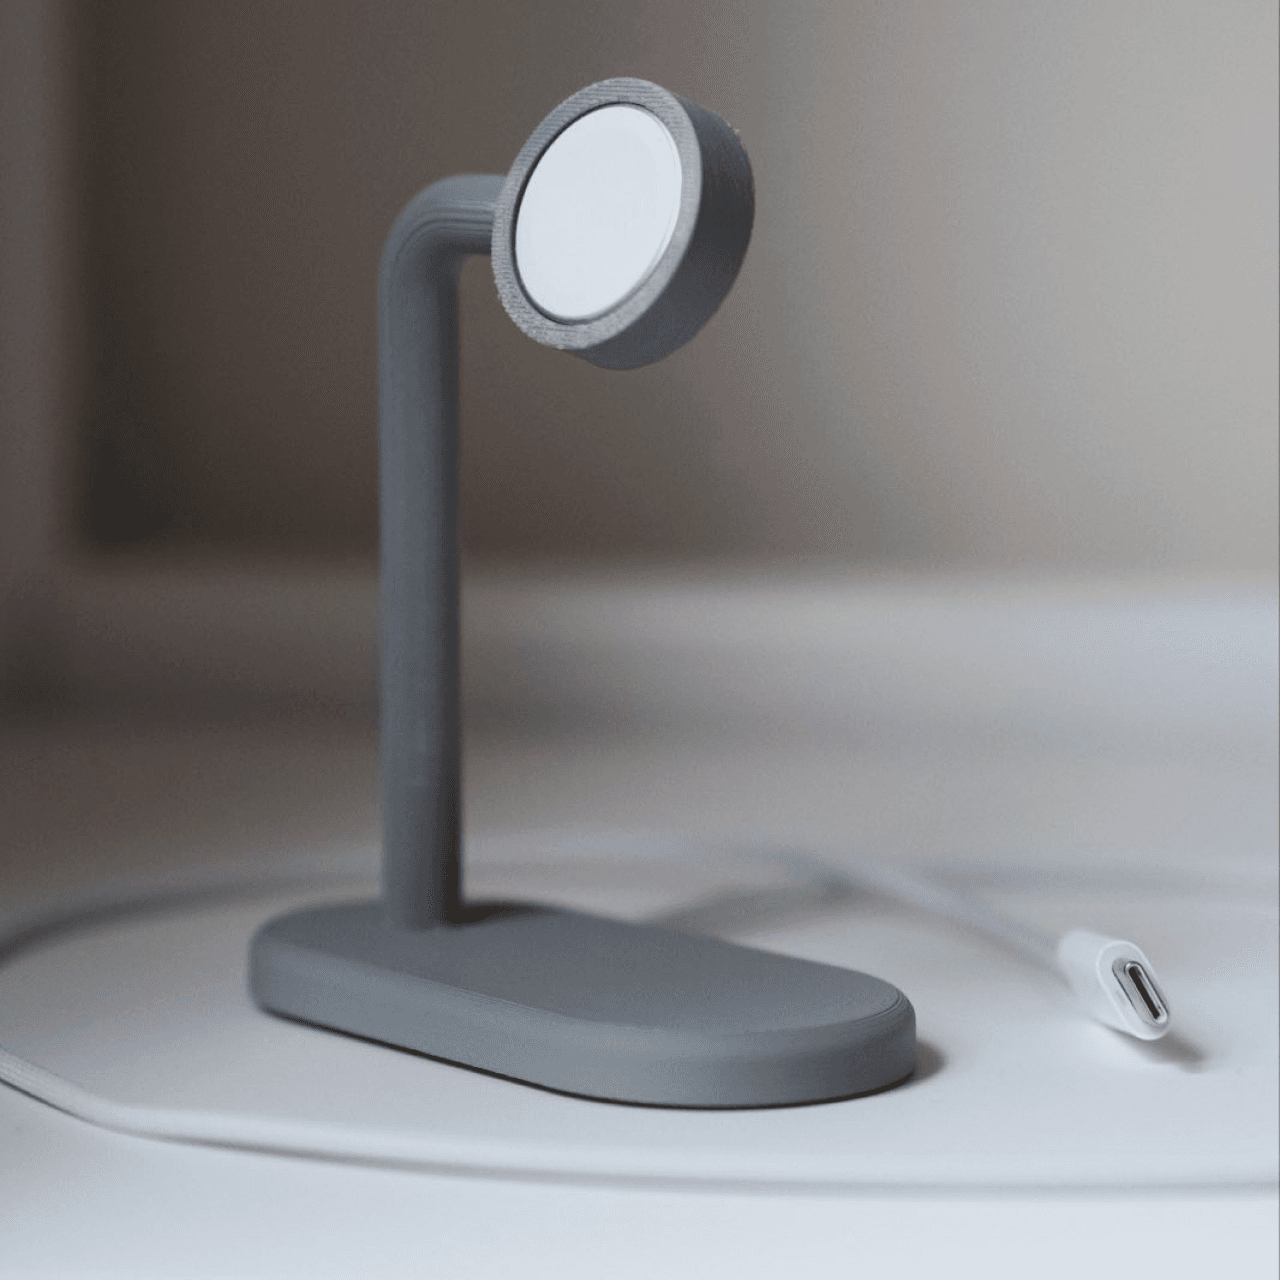 APPLE WATCH CHARGER MINI STAND 3d model